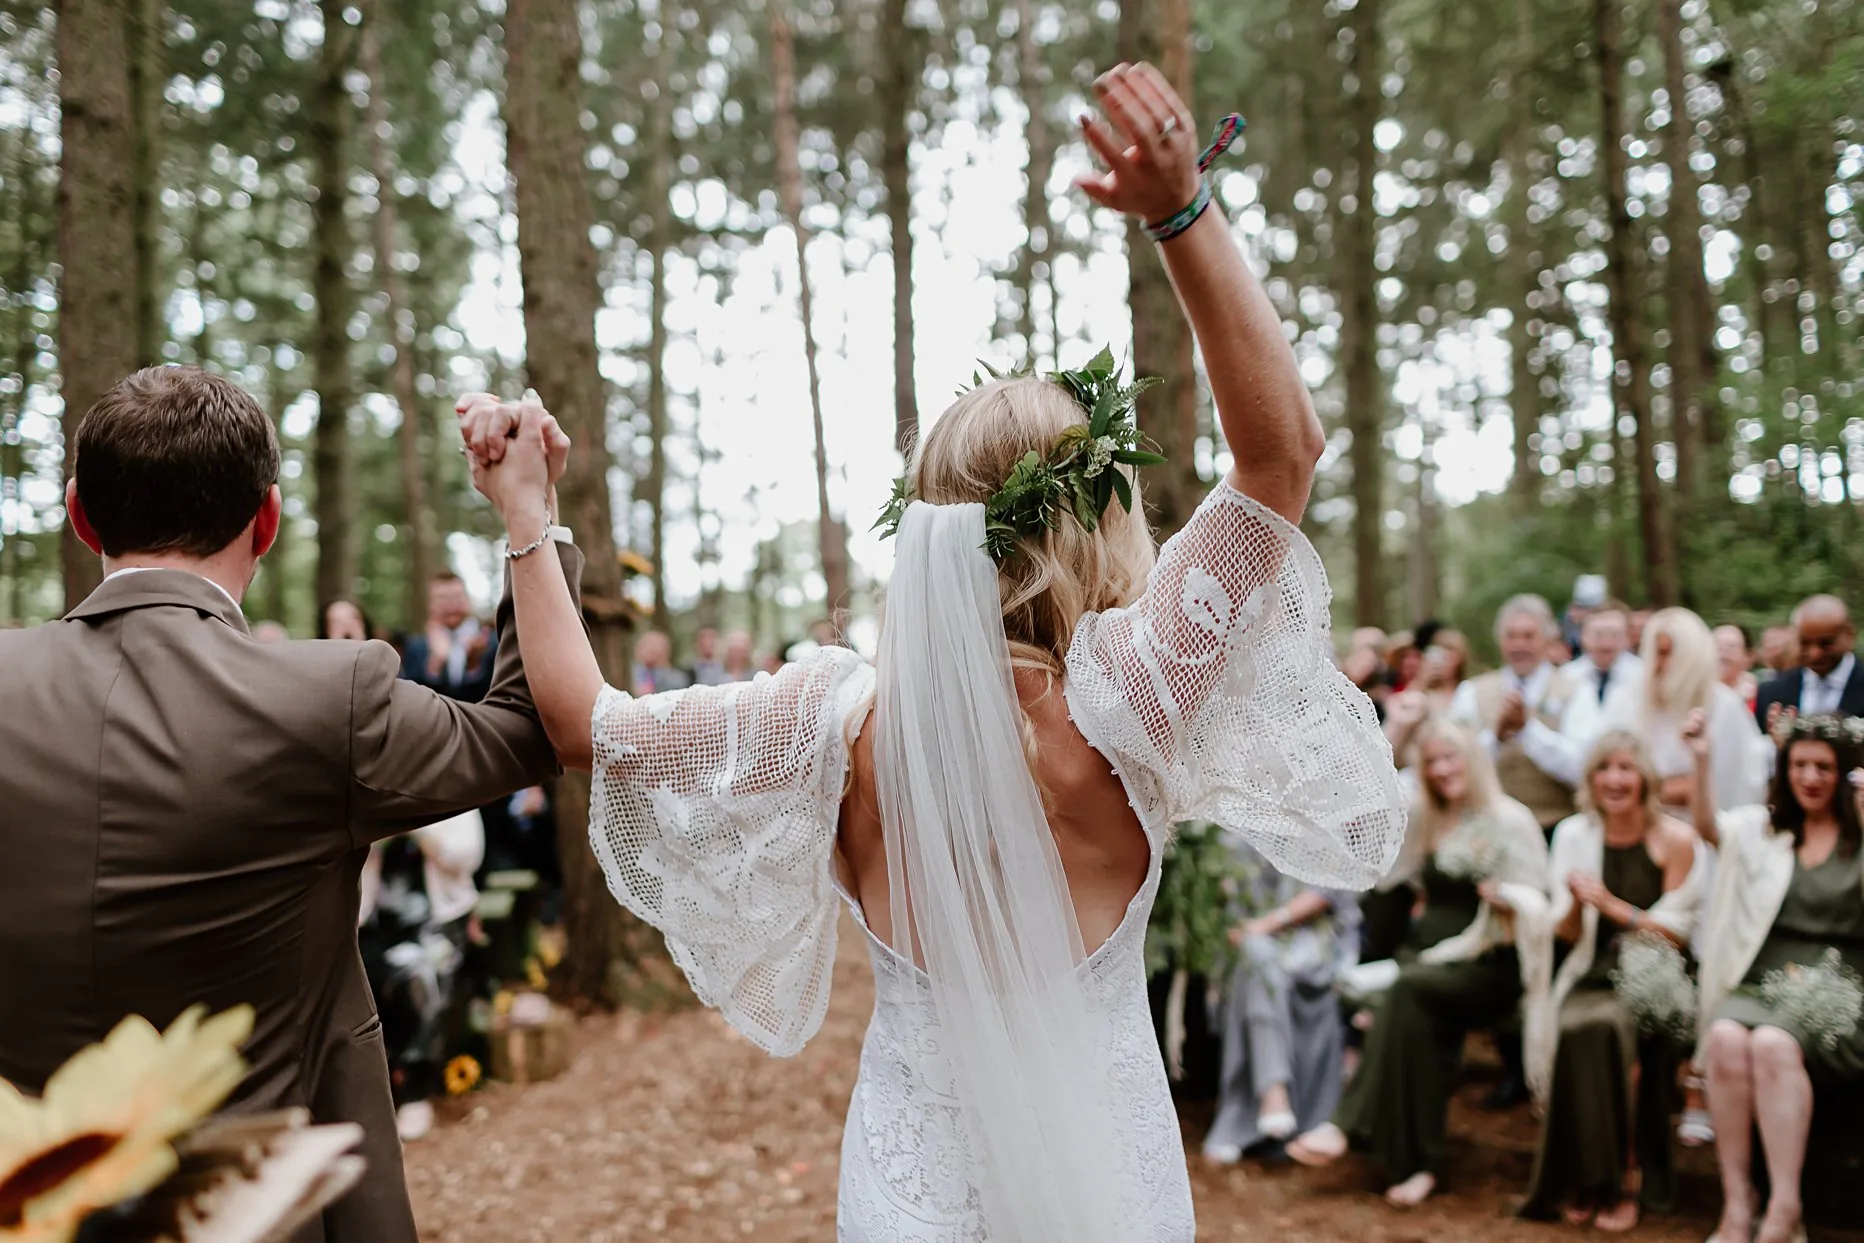 Bride and groom celebrating getting married in woodland wedding ceremony. Bride is throwing up her arms in excitement and looking towards her friends and family who are clapping.